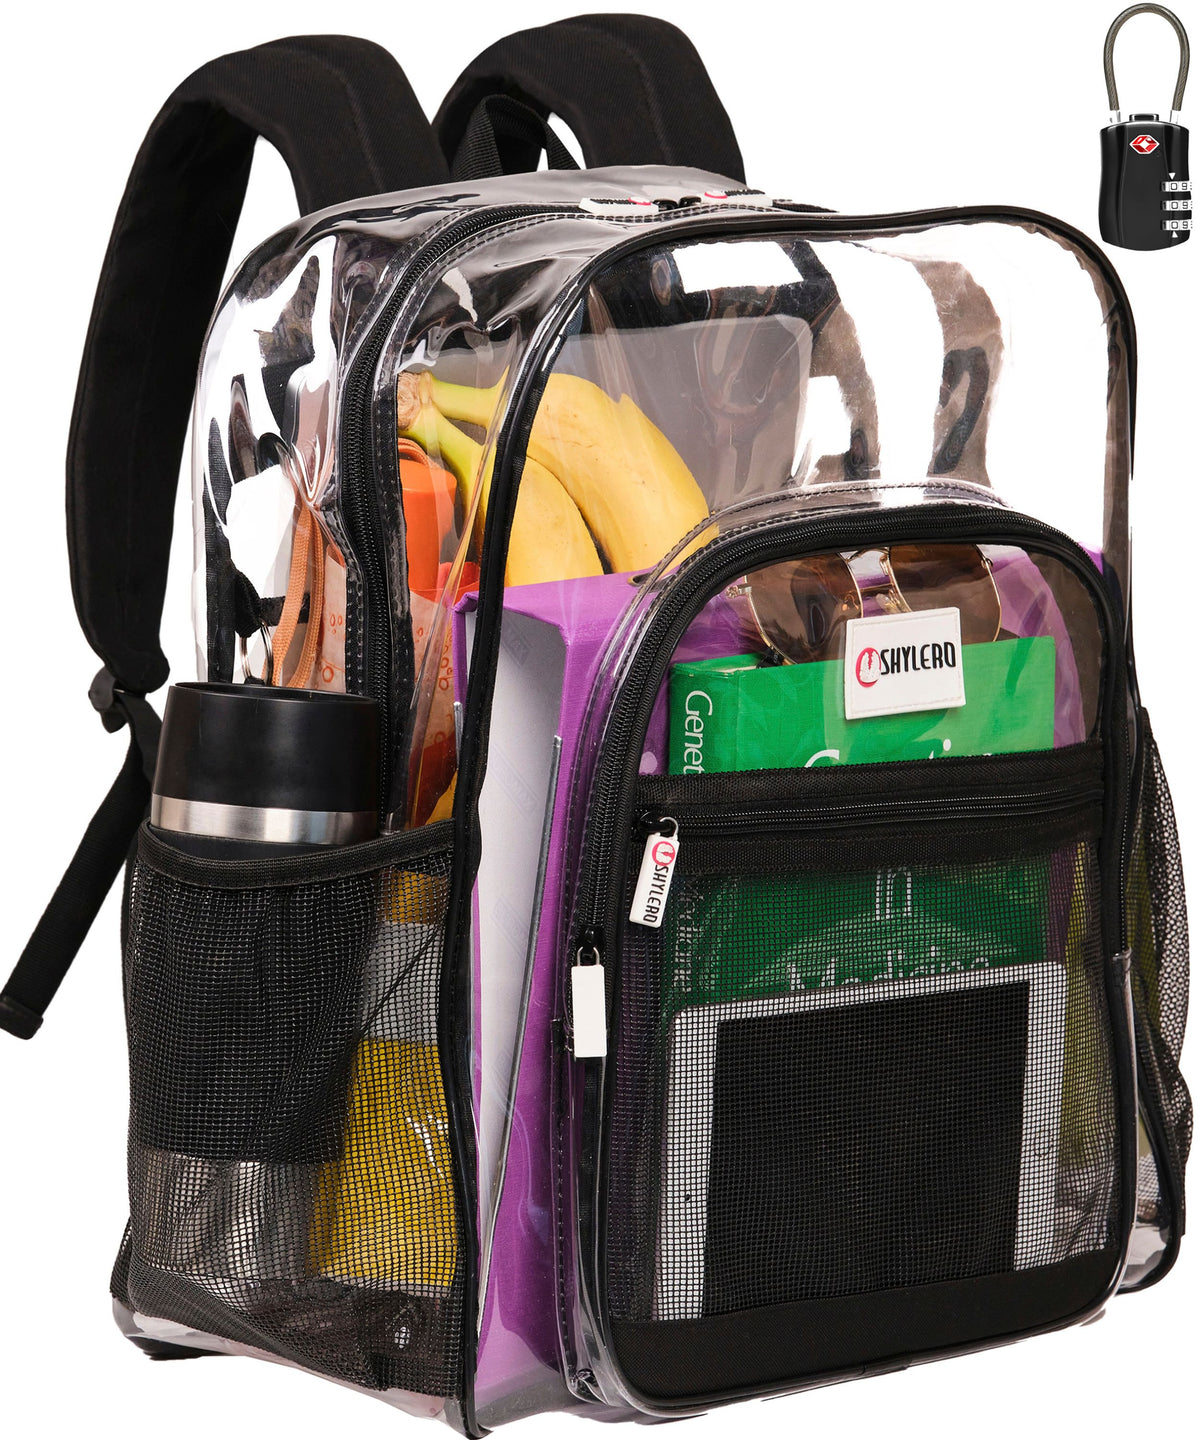 Clear Backpack For Work and School Backpack XL | TSA Lock | H18" x W14" x D8" (45cm x 35cm x 20cm) | 31.5 L | Black Rhino